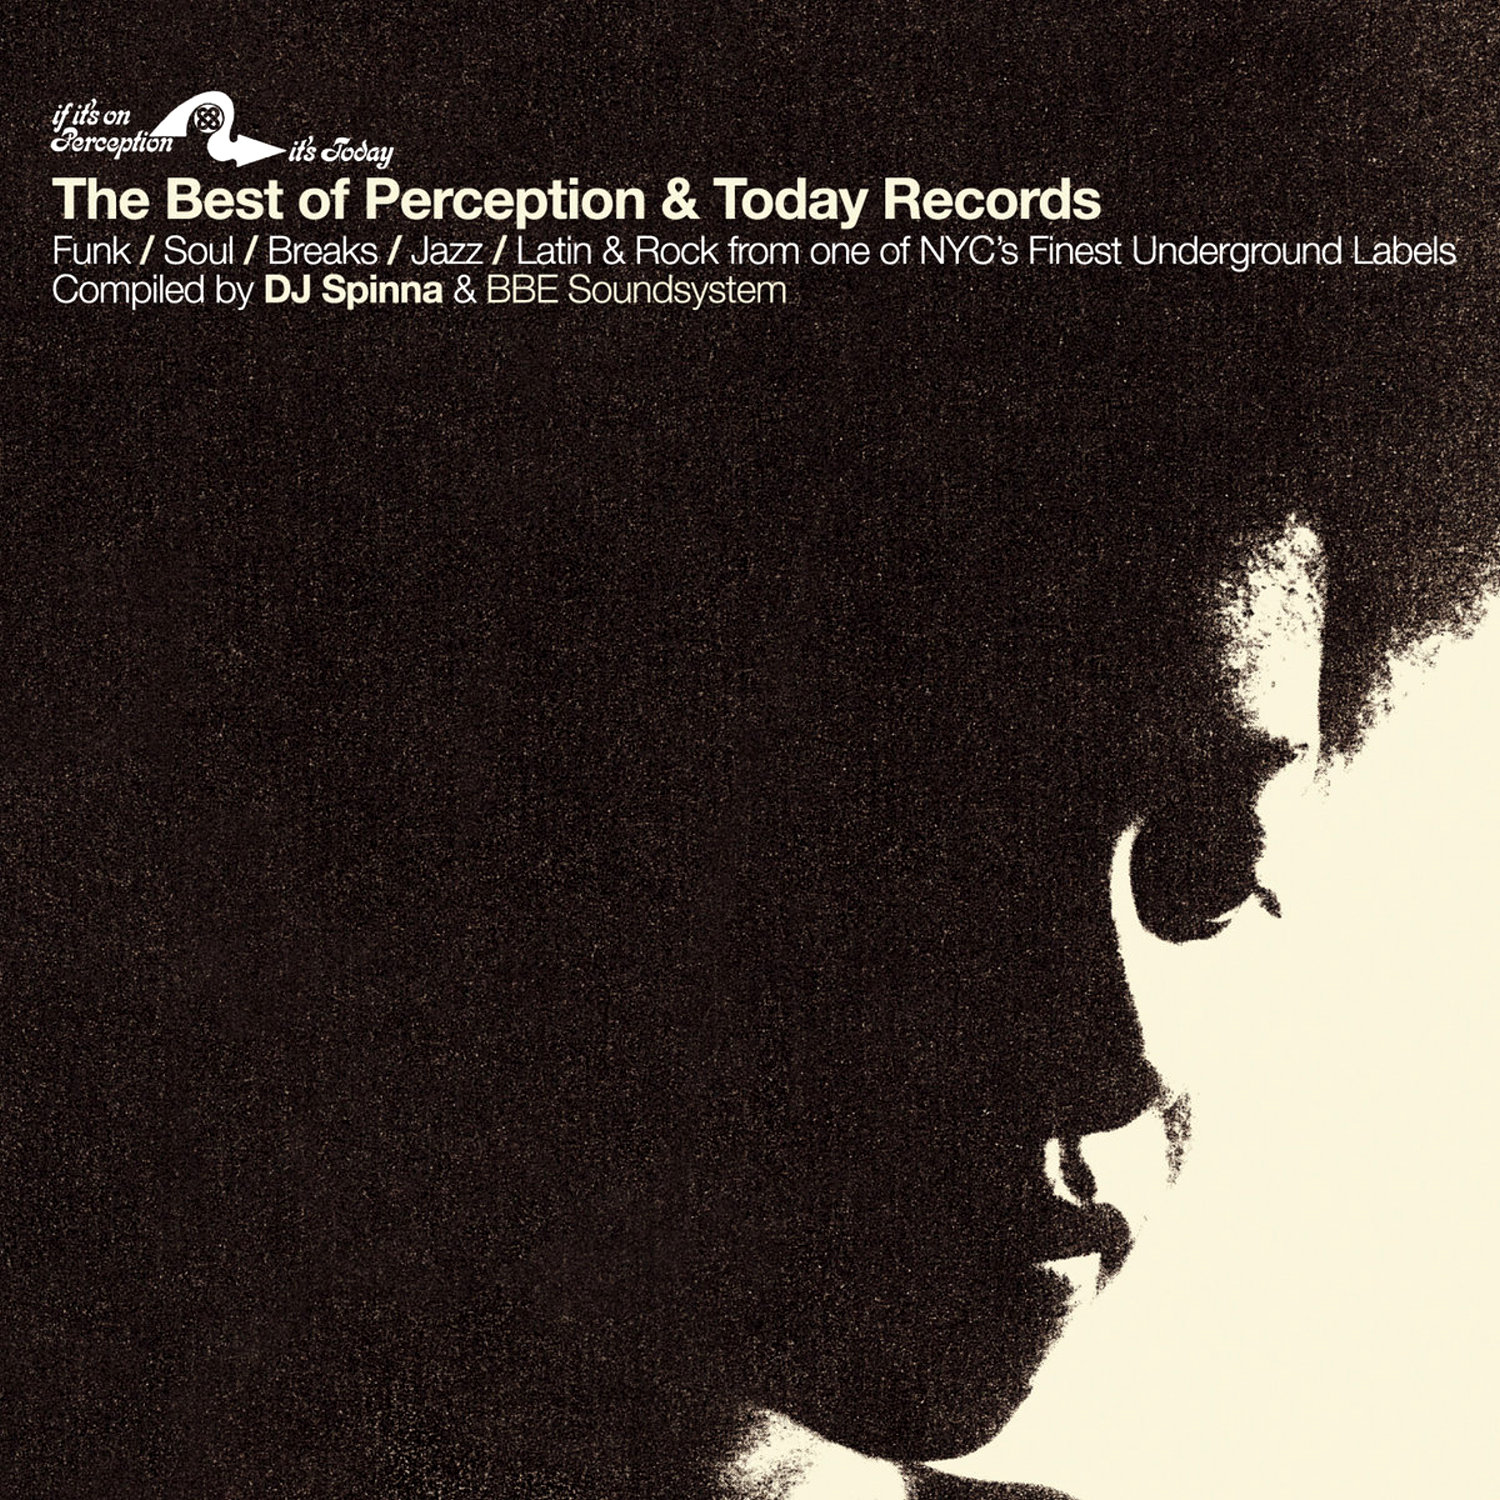 Butterboy: VA - Best of Perception & Today Records [2012] (3 x CDs)